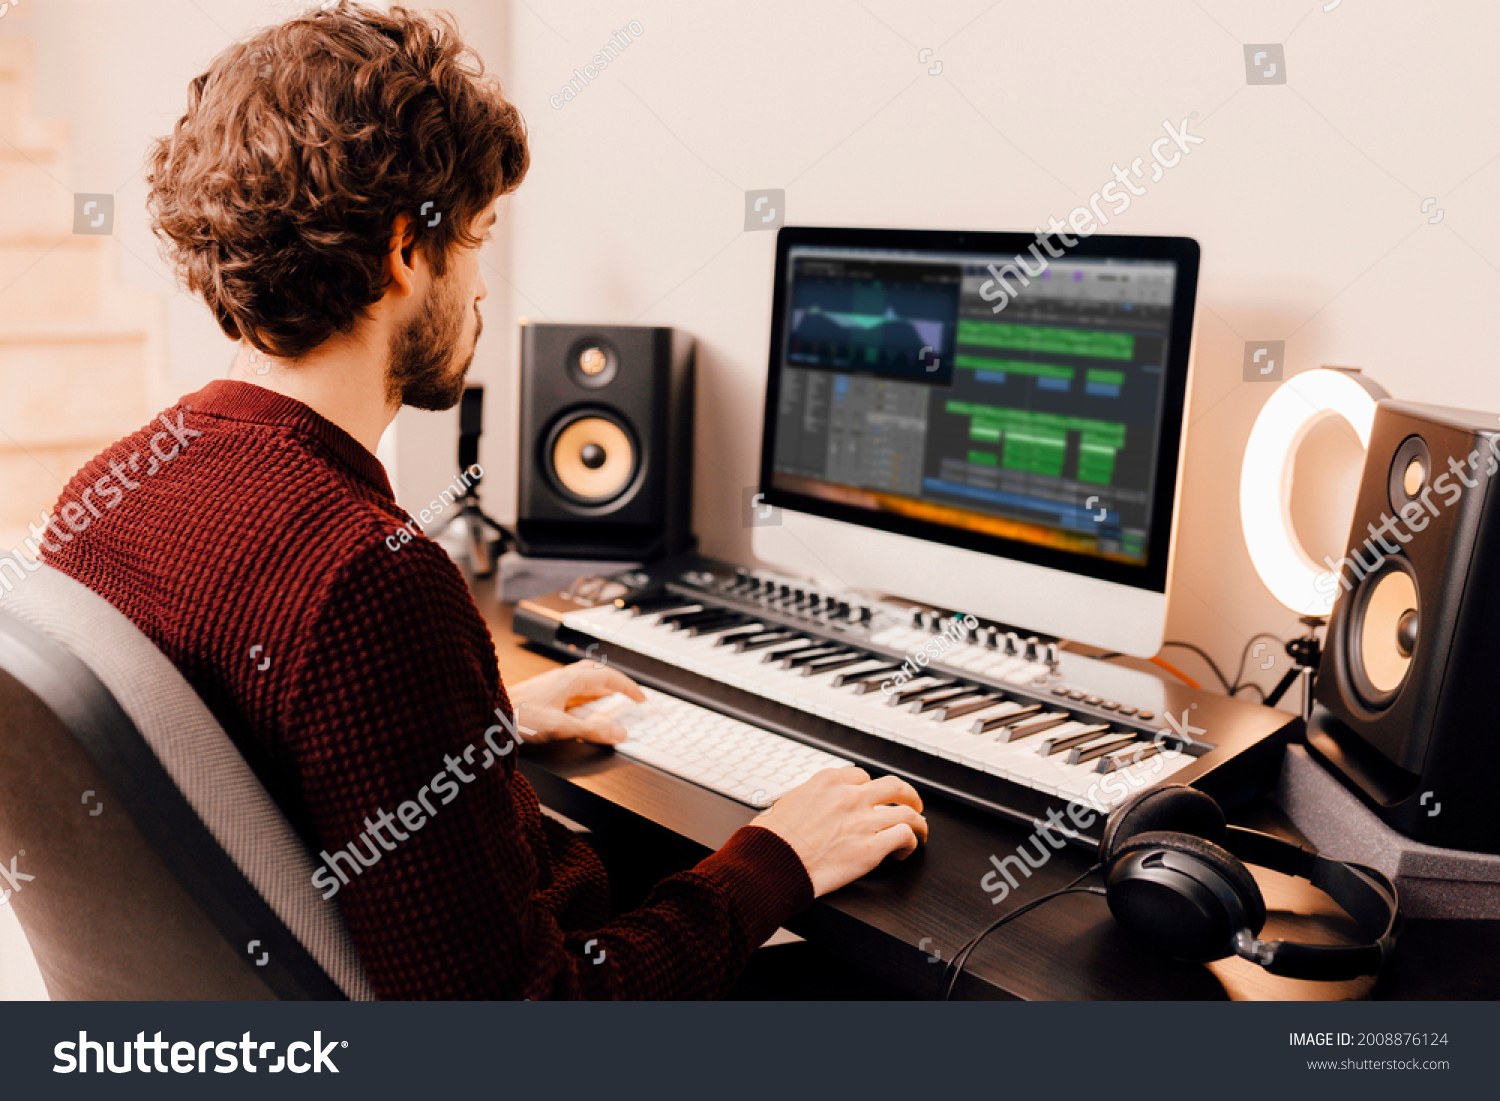 stock-photo-professional-male-music-producer-composer-working-in-recording-home-studio-music-production-2008876124